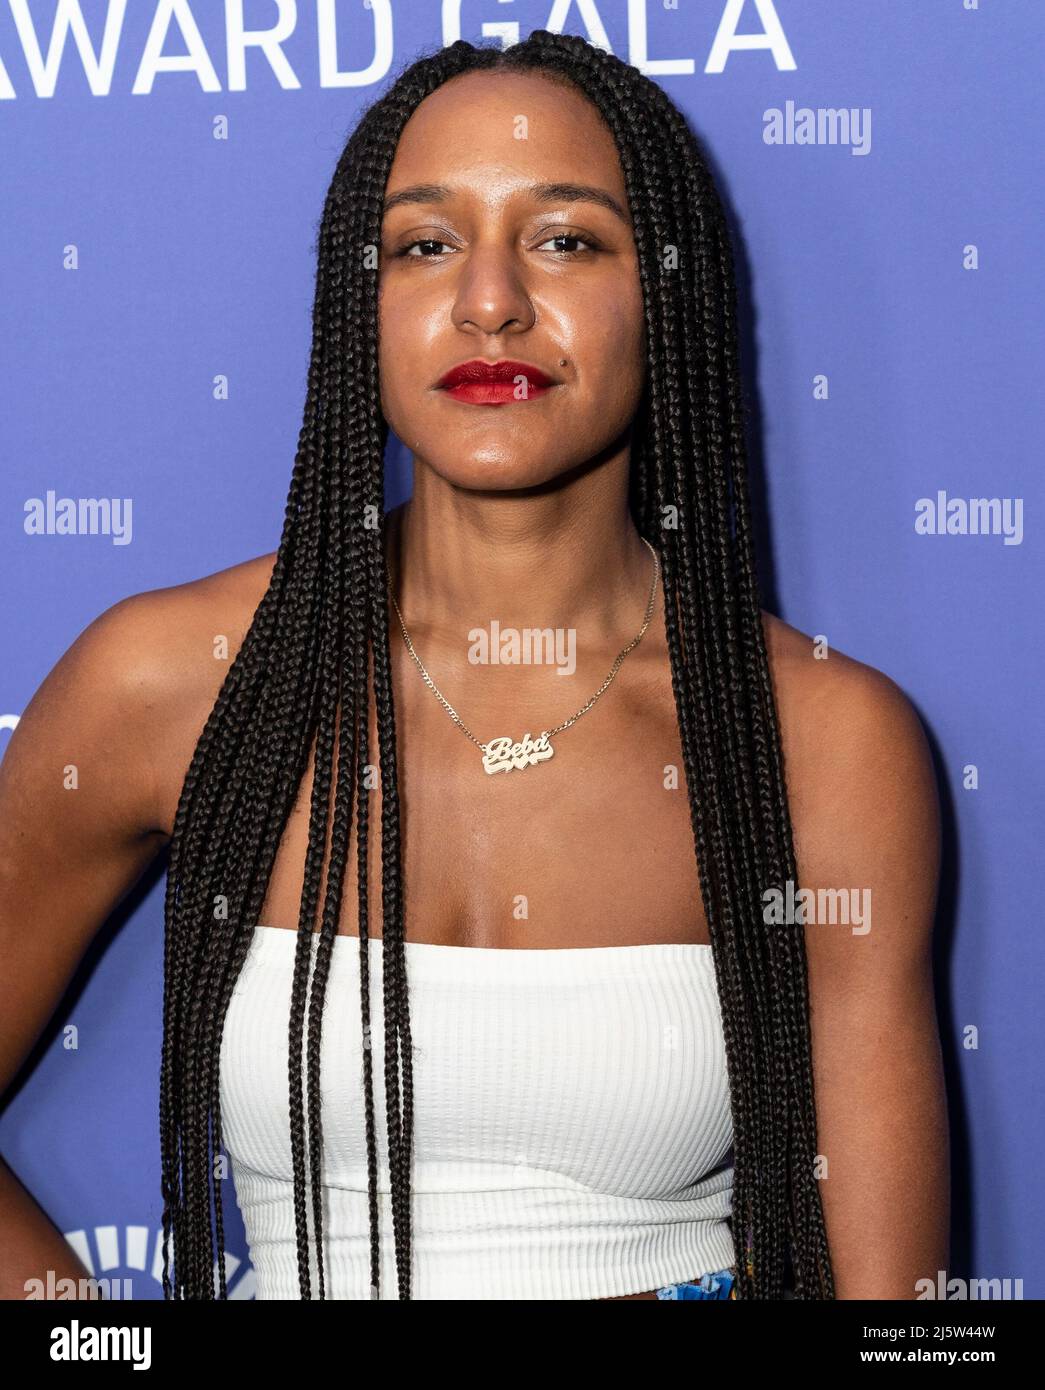 New York, Usa. 25. April 2022. Rebeca Hunt nimmt an der Chaplin Award Gala 47. in der Alice Tully Hall Teil (Foto: Lev Radin/Pacific Press) Quelle: Pacific Press Media Production Corp./Alamy Live News Stockfoto